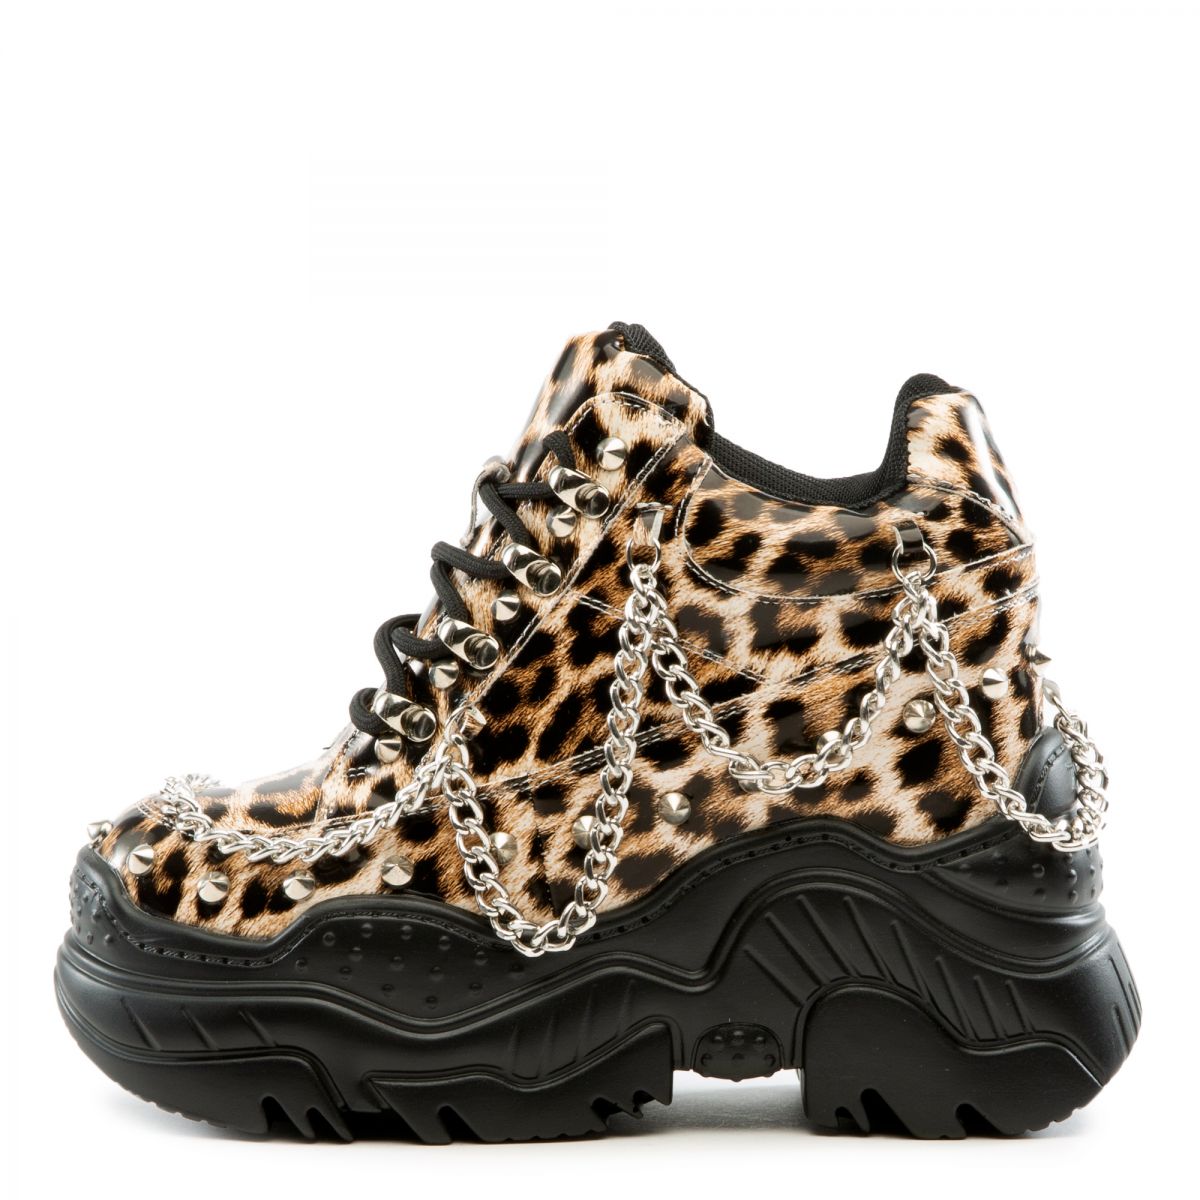 Anthony Wang Space Candy Platform Sneakers with Studs Black Patent